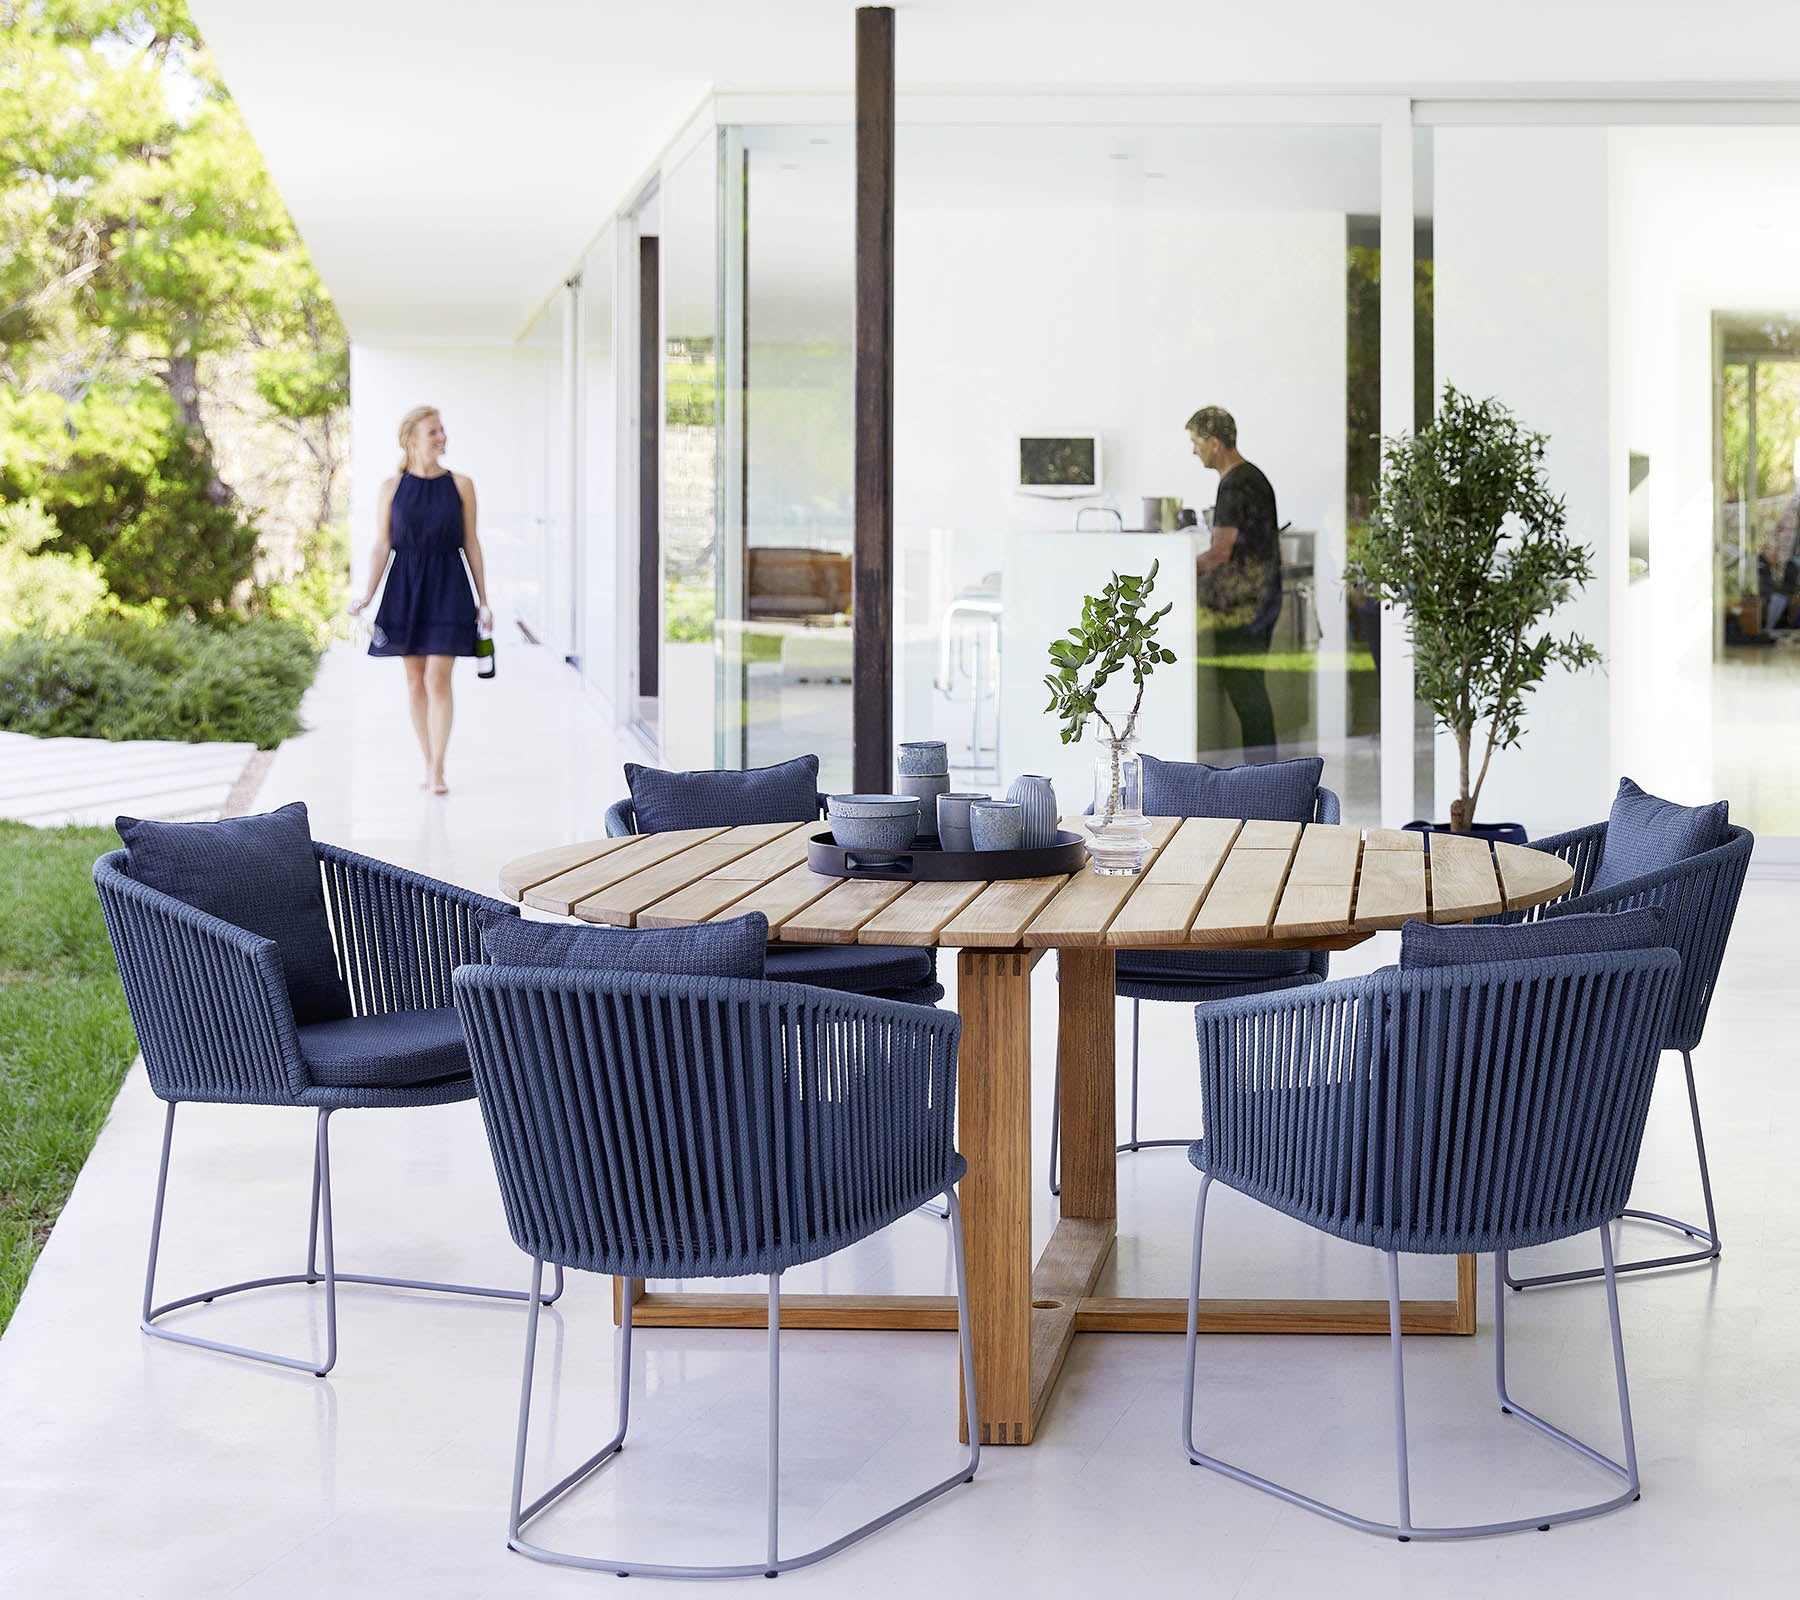 Endless Outdoor Round Dining TableBoxhill's Endless Outdoor Round Dining Table lifestyle image with cups and bowls on top, and 6 blue dining chairs at patio